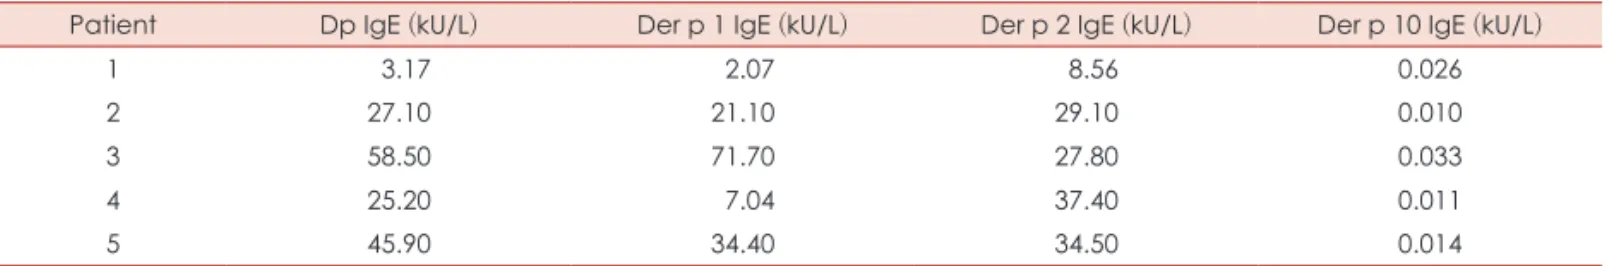 Table 2. Results of ImmunoCAP 250 Ⓡ  of the five patients with Der p 10 IgE